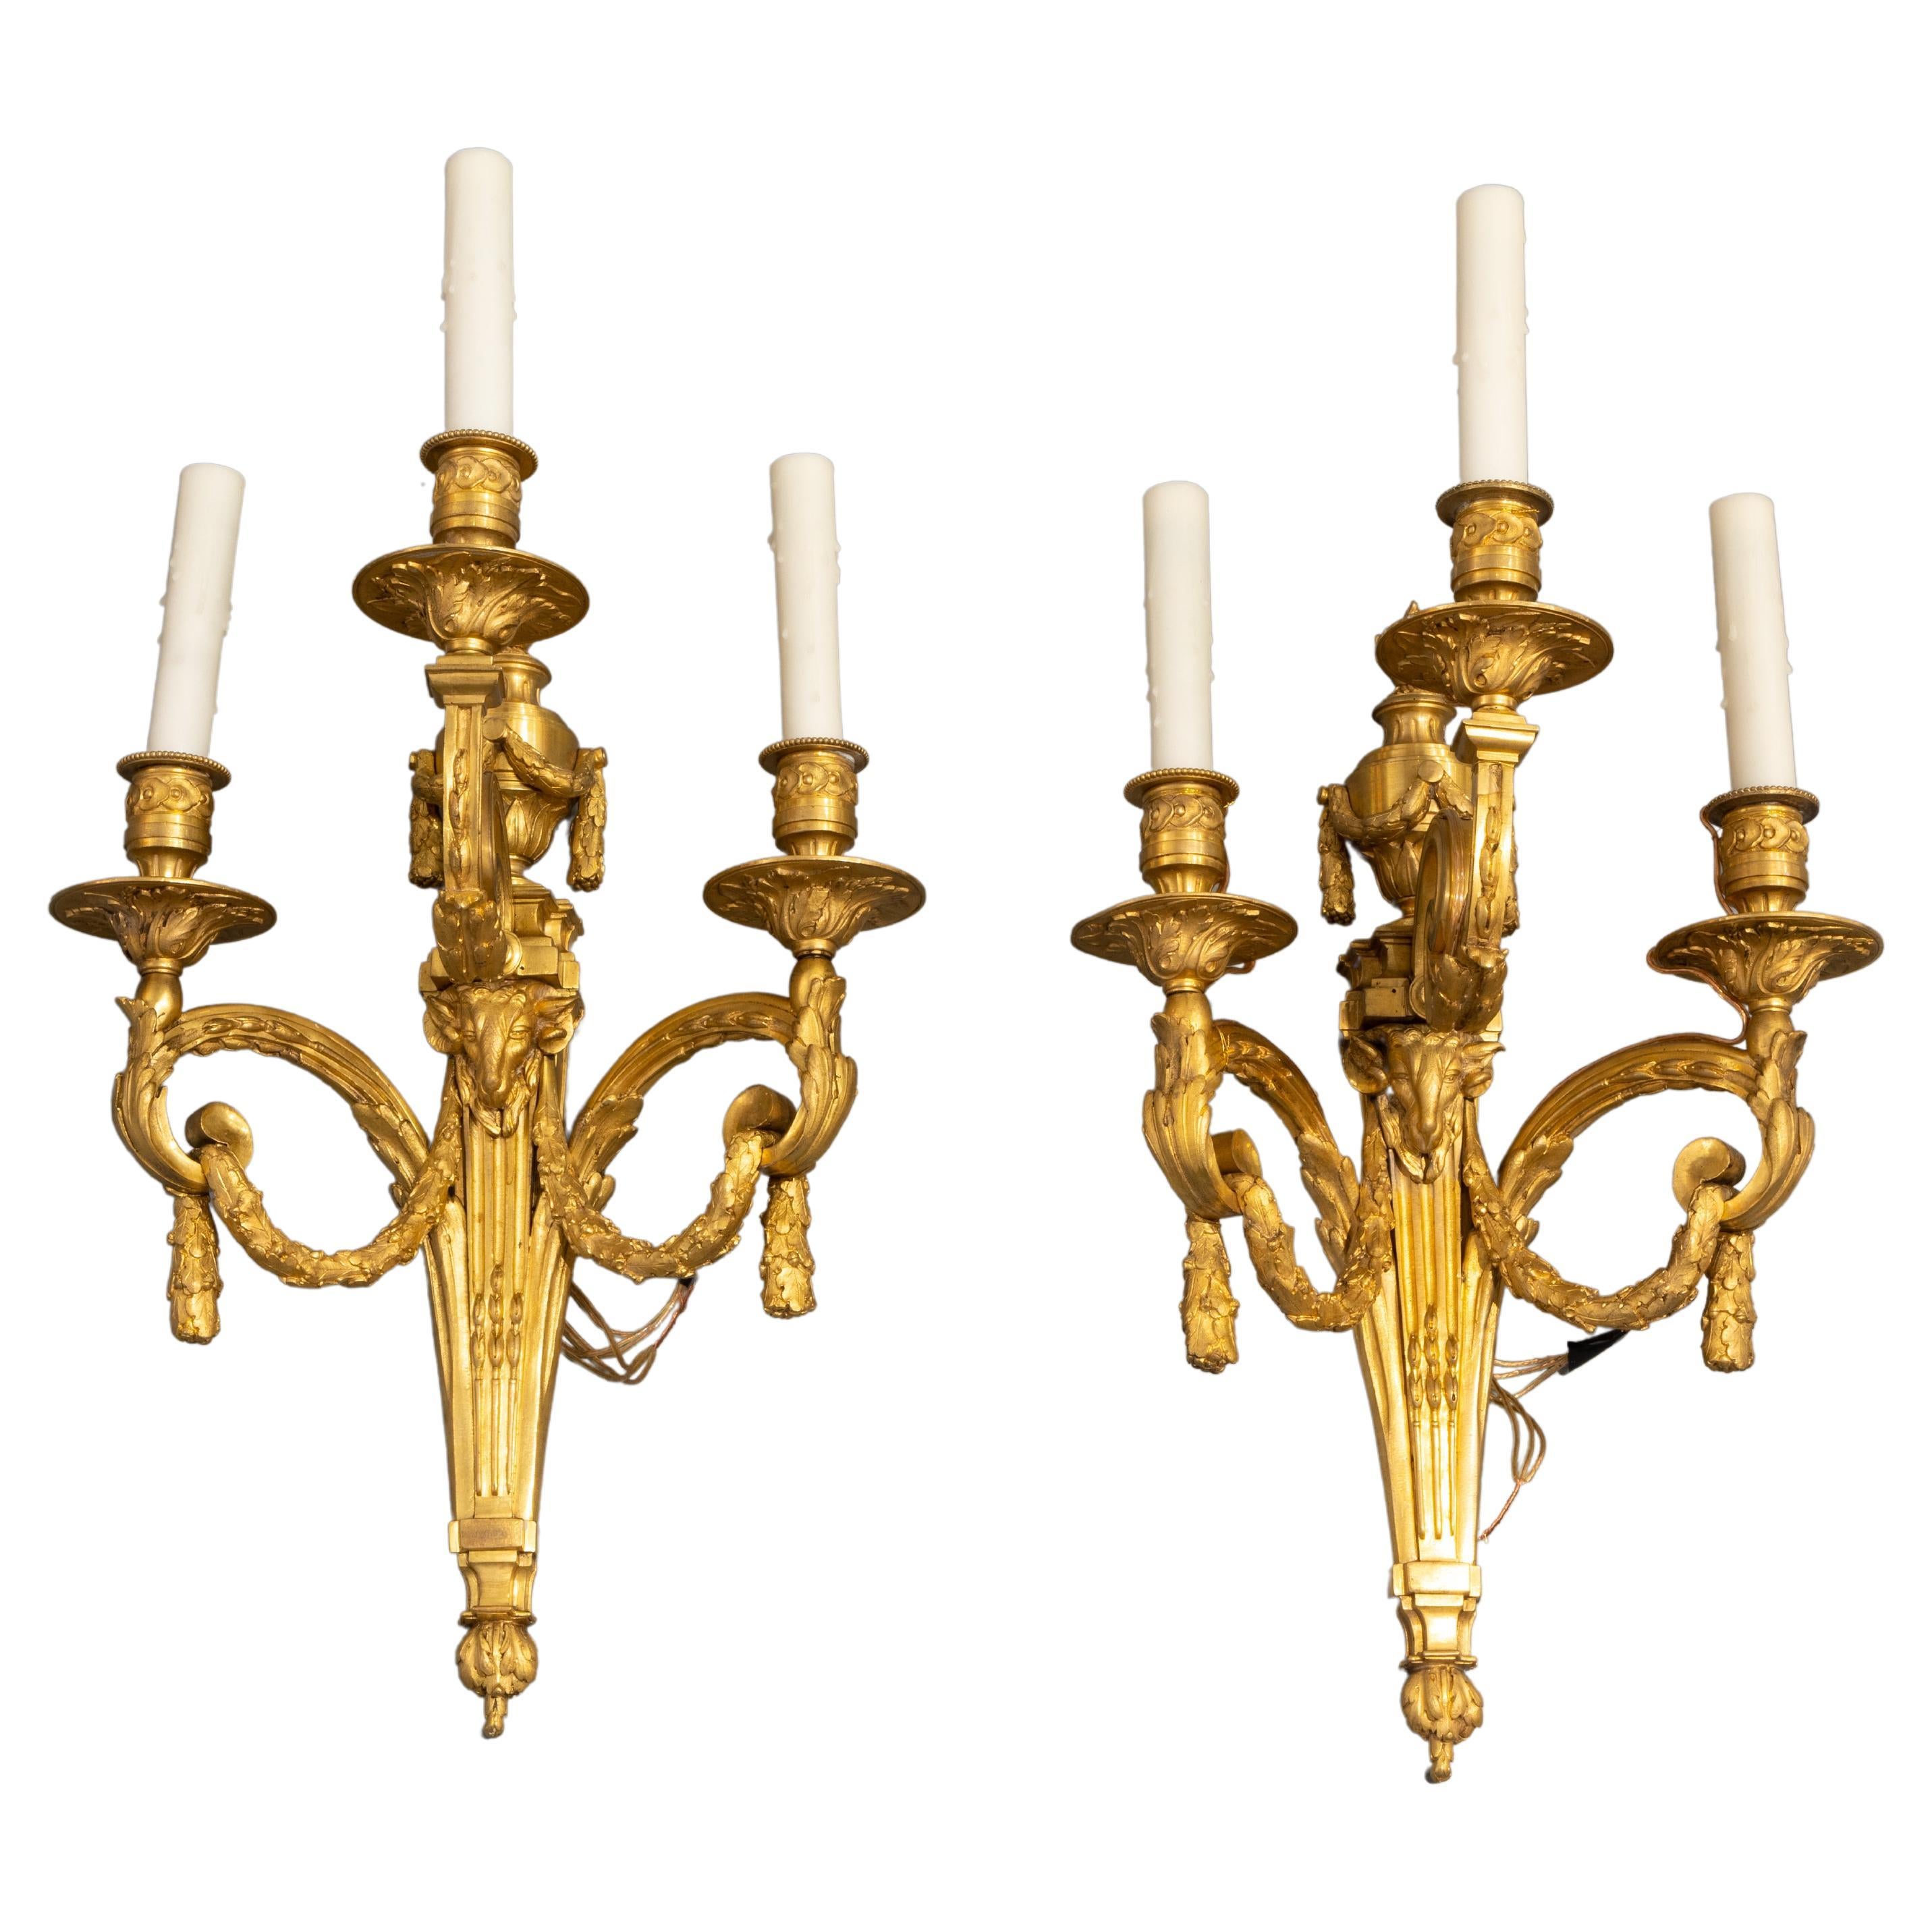 Very Fine Pair of 19th Century French Louis XVI Gilt Bronze Sconces For Sale